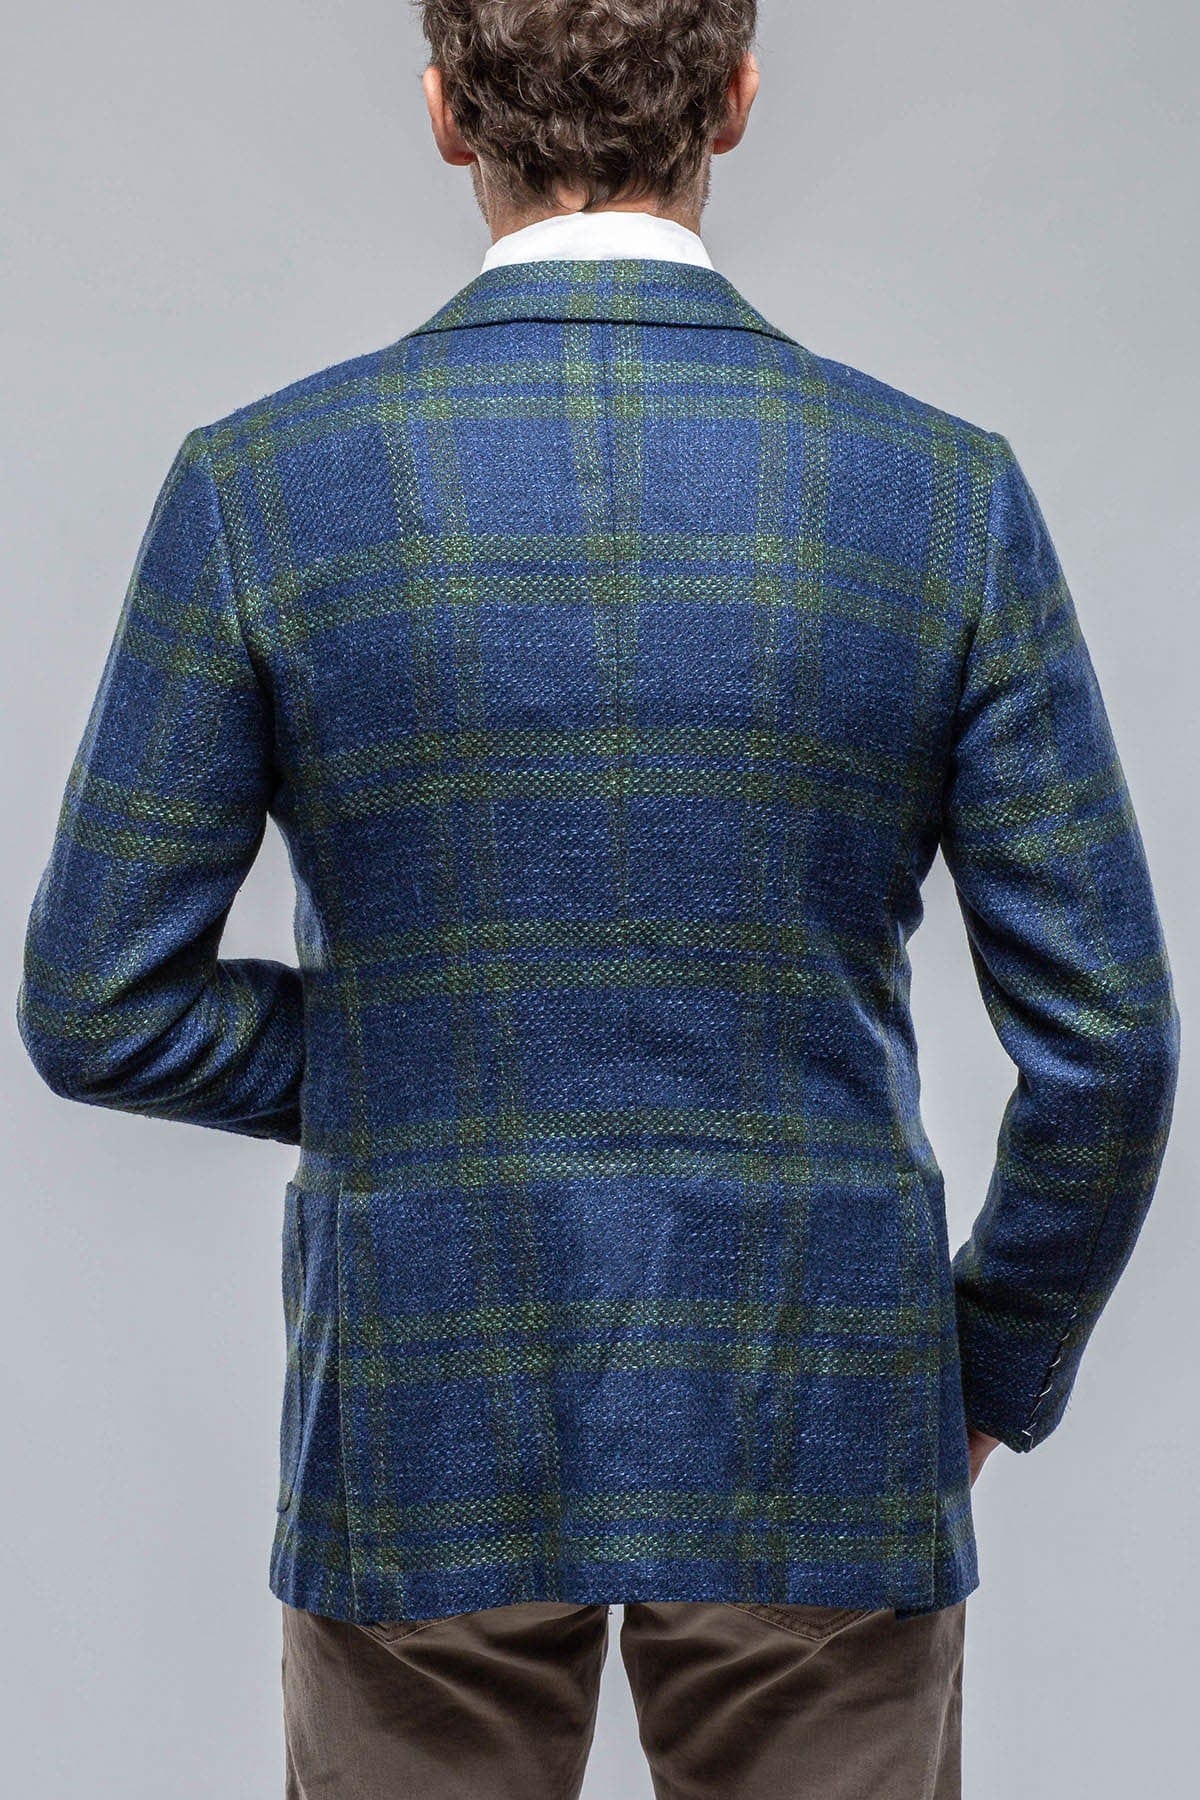 Elko Cashmere Sport Coat in Blue and Green - AXEL'S